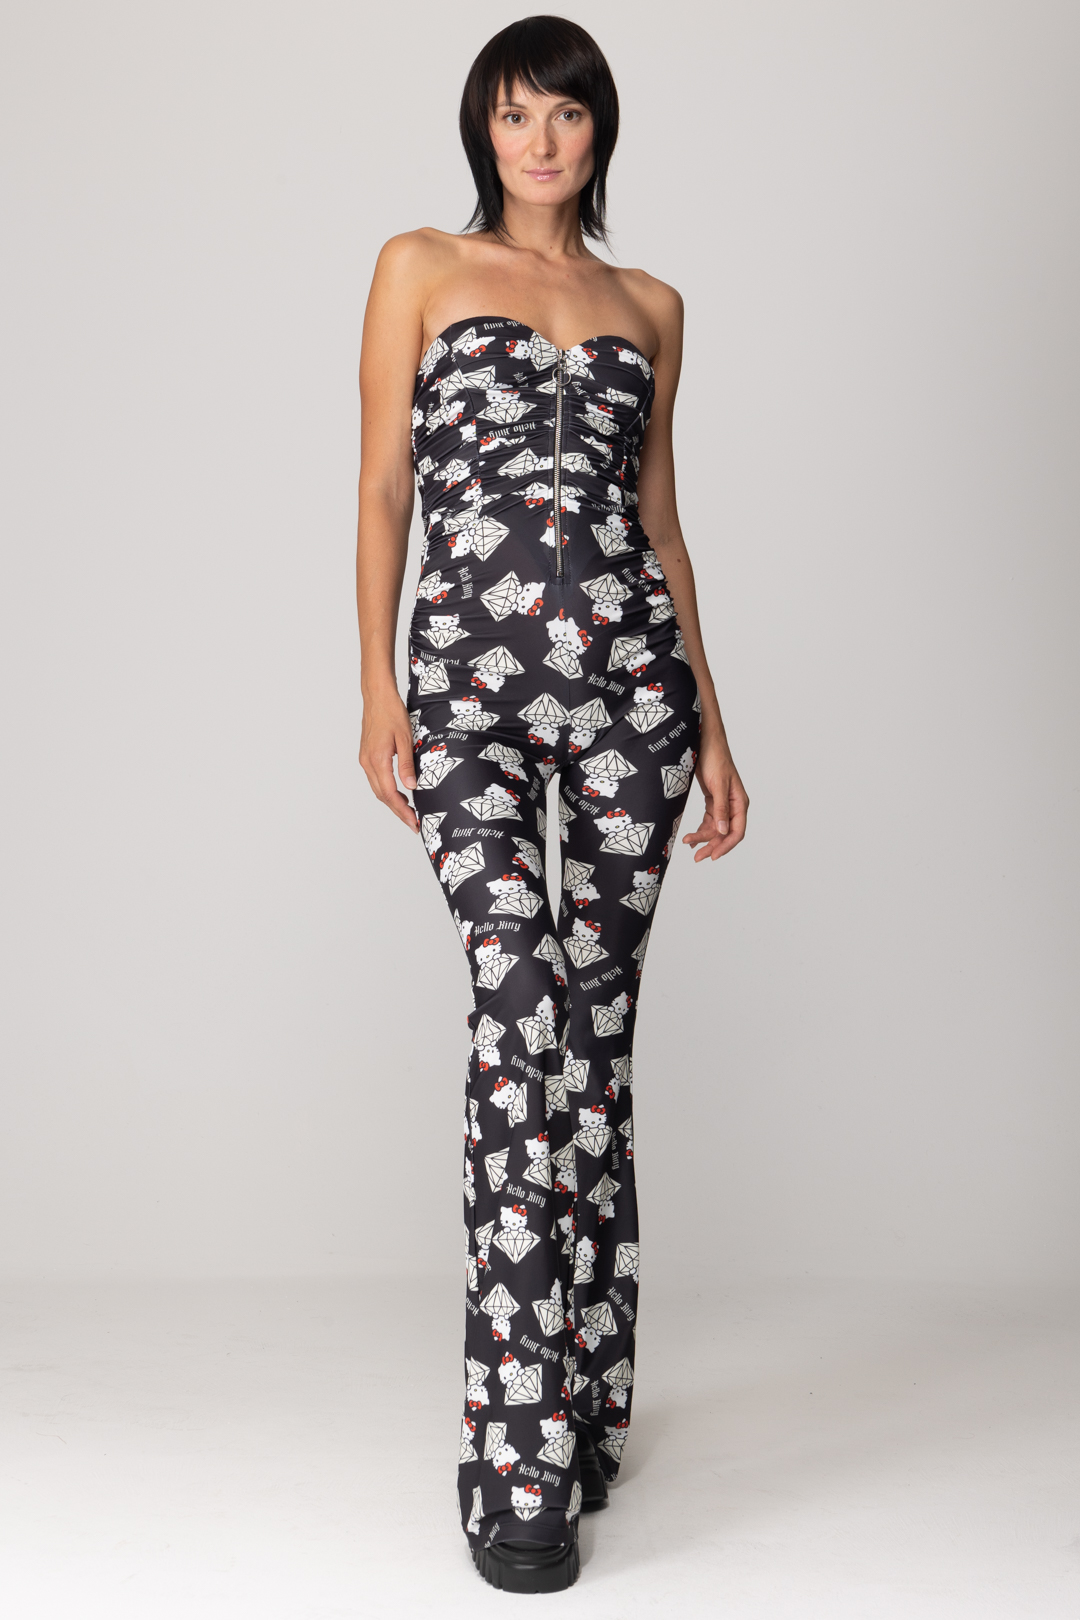 Preview: Aniye By Long Jumpsuit with Diamond Kitty print DIAMOND KITTY